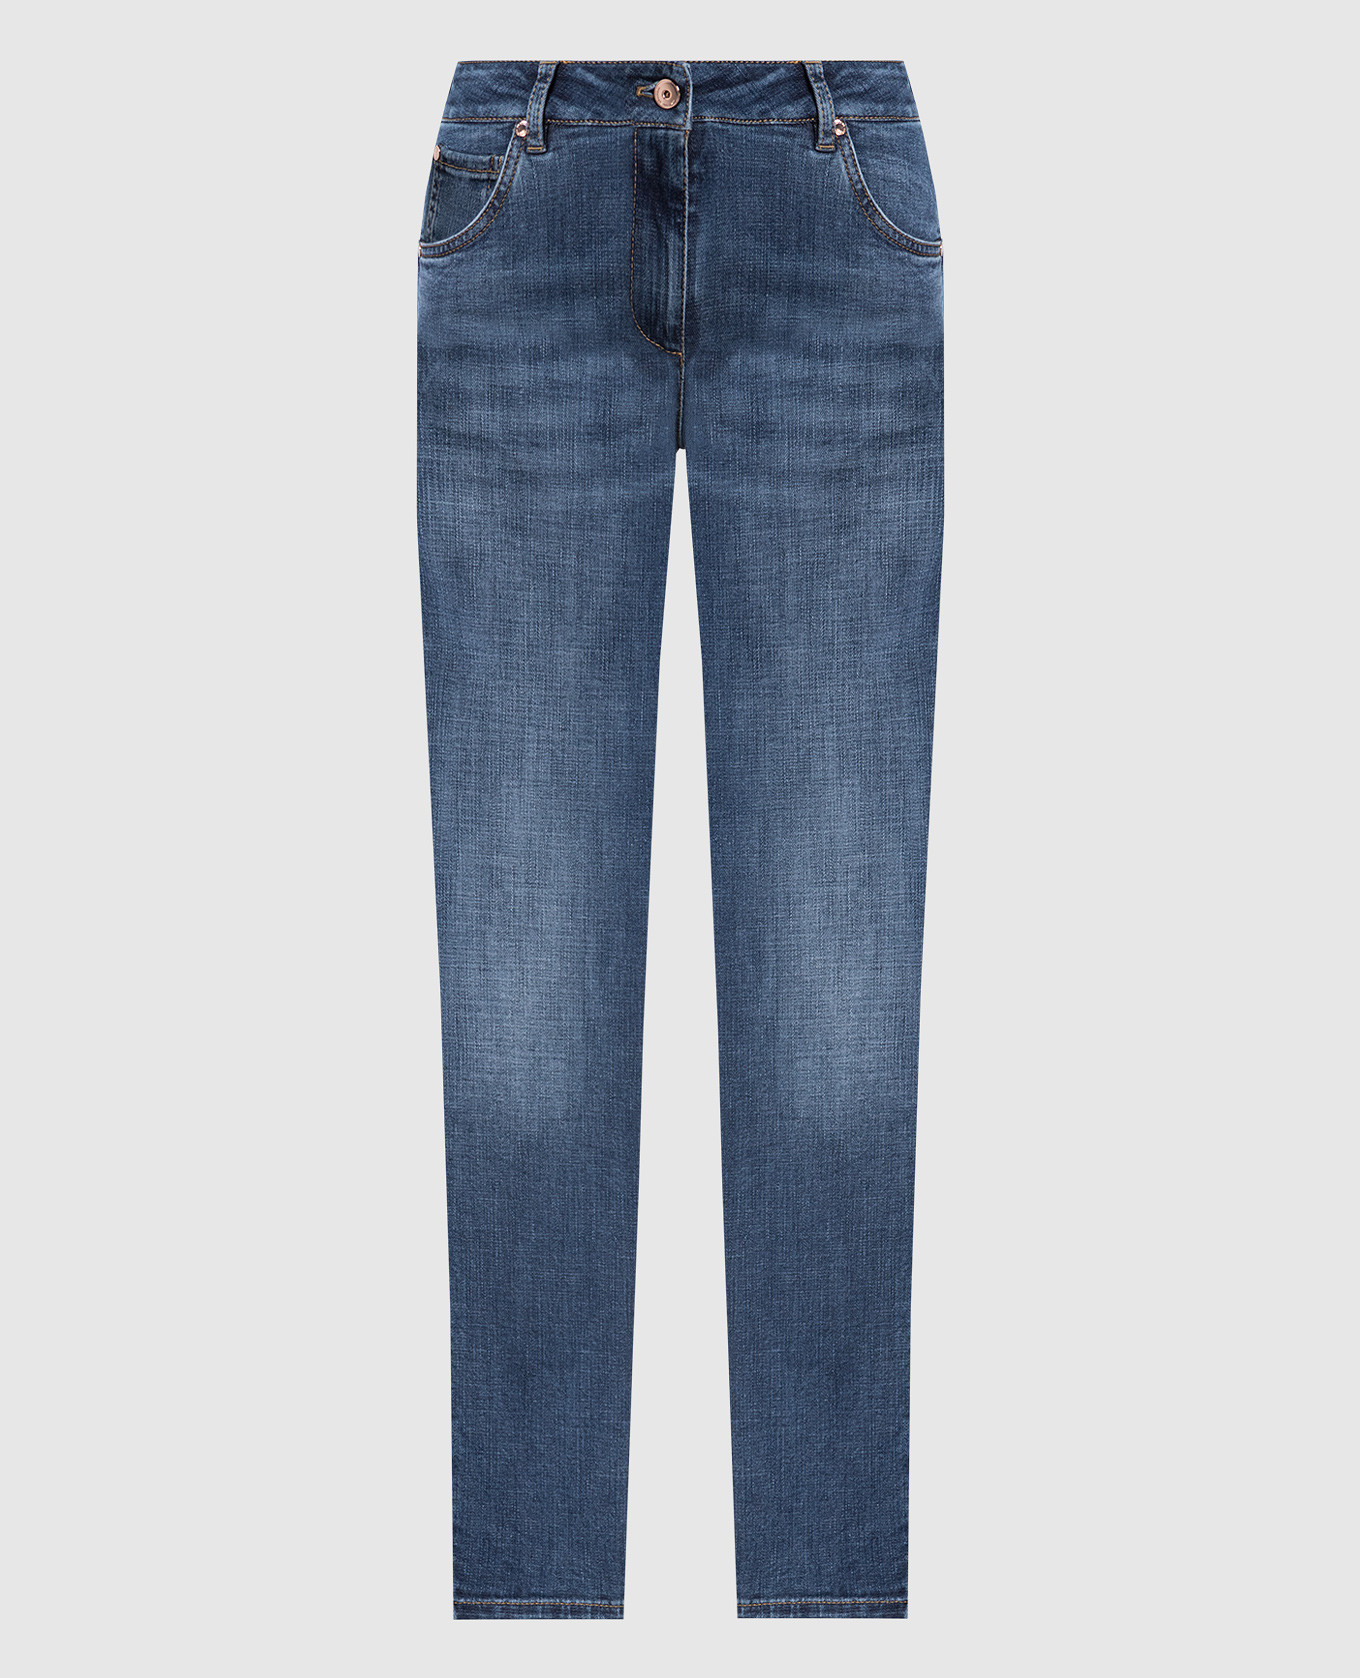 Blue skinny jeans with monil chain